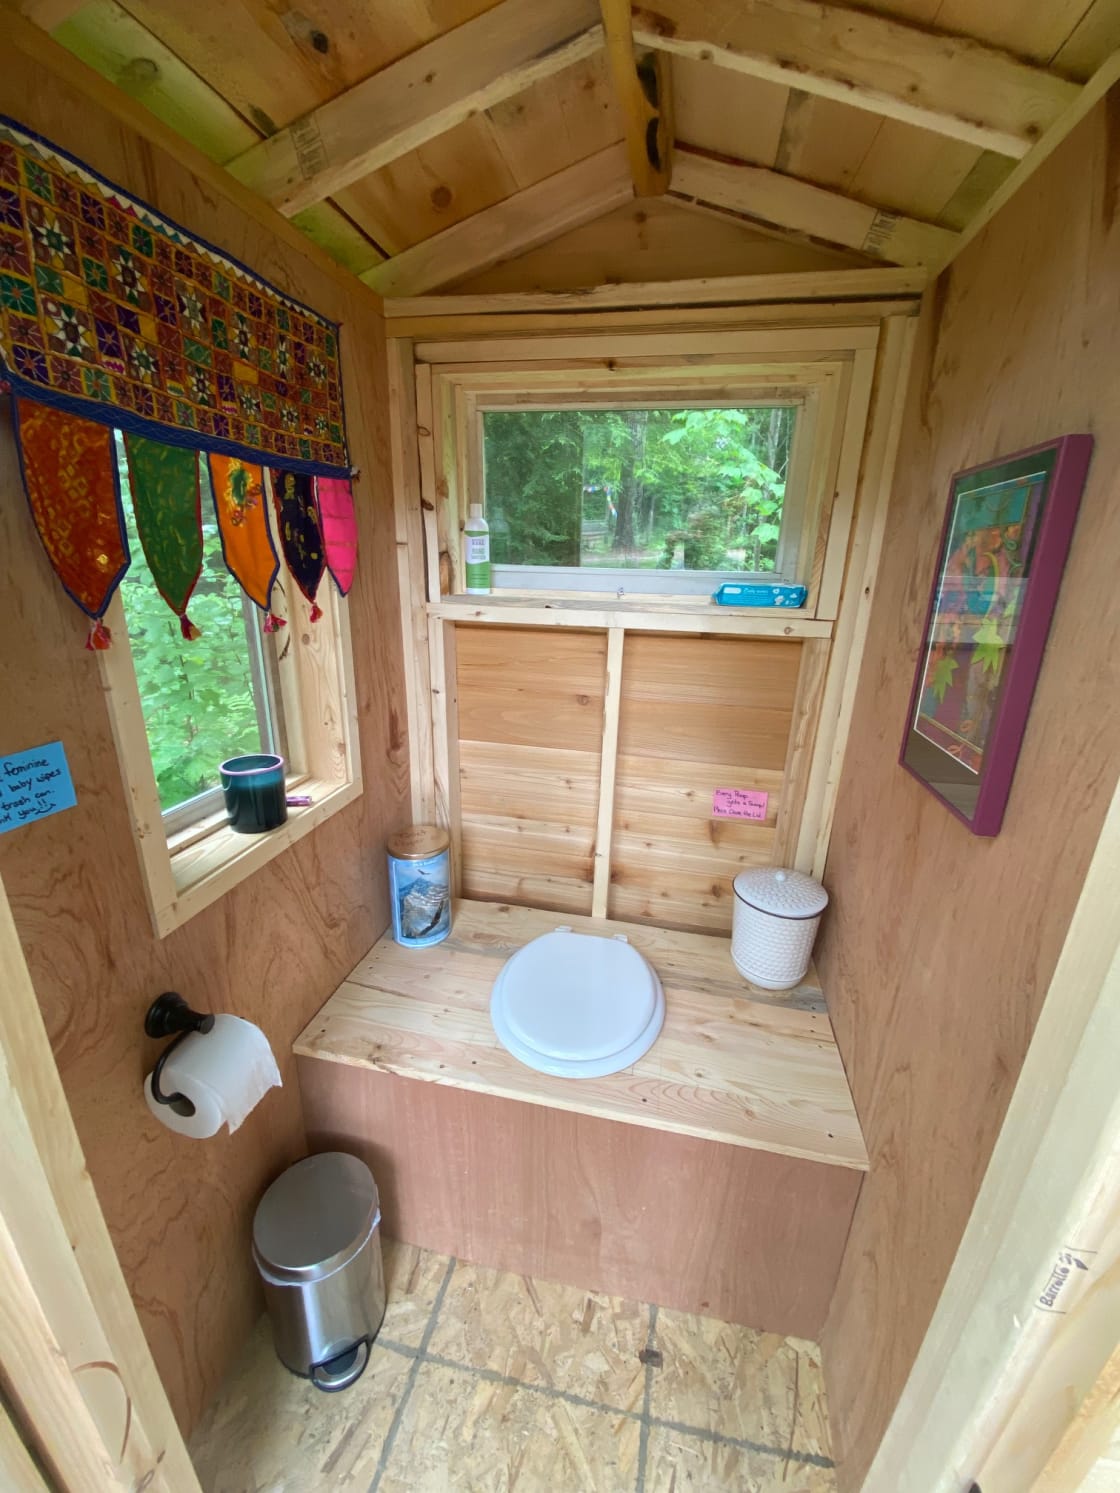 Our newest addition, the inside of the outhouse.